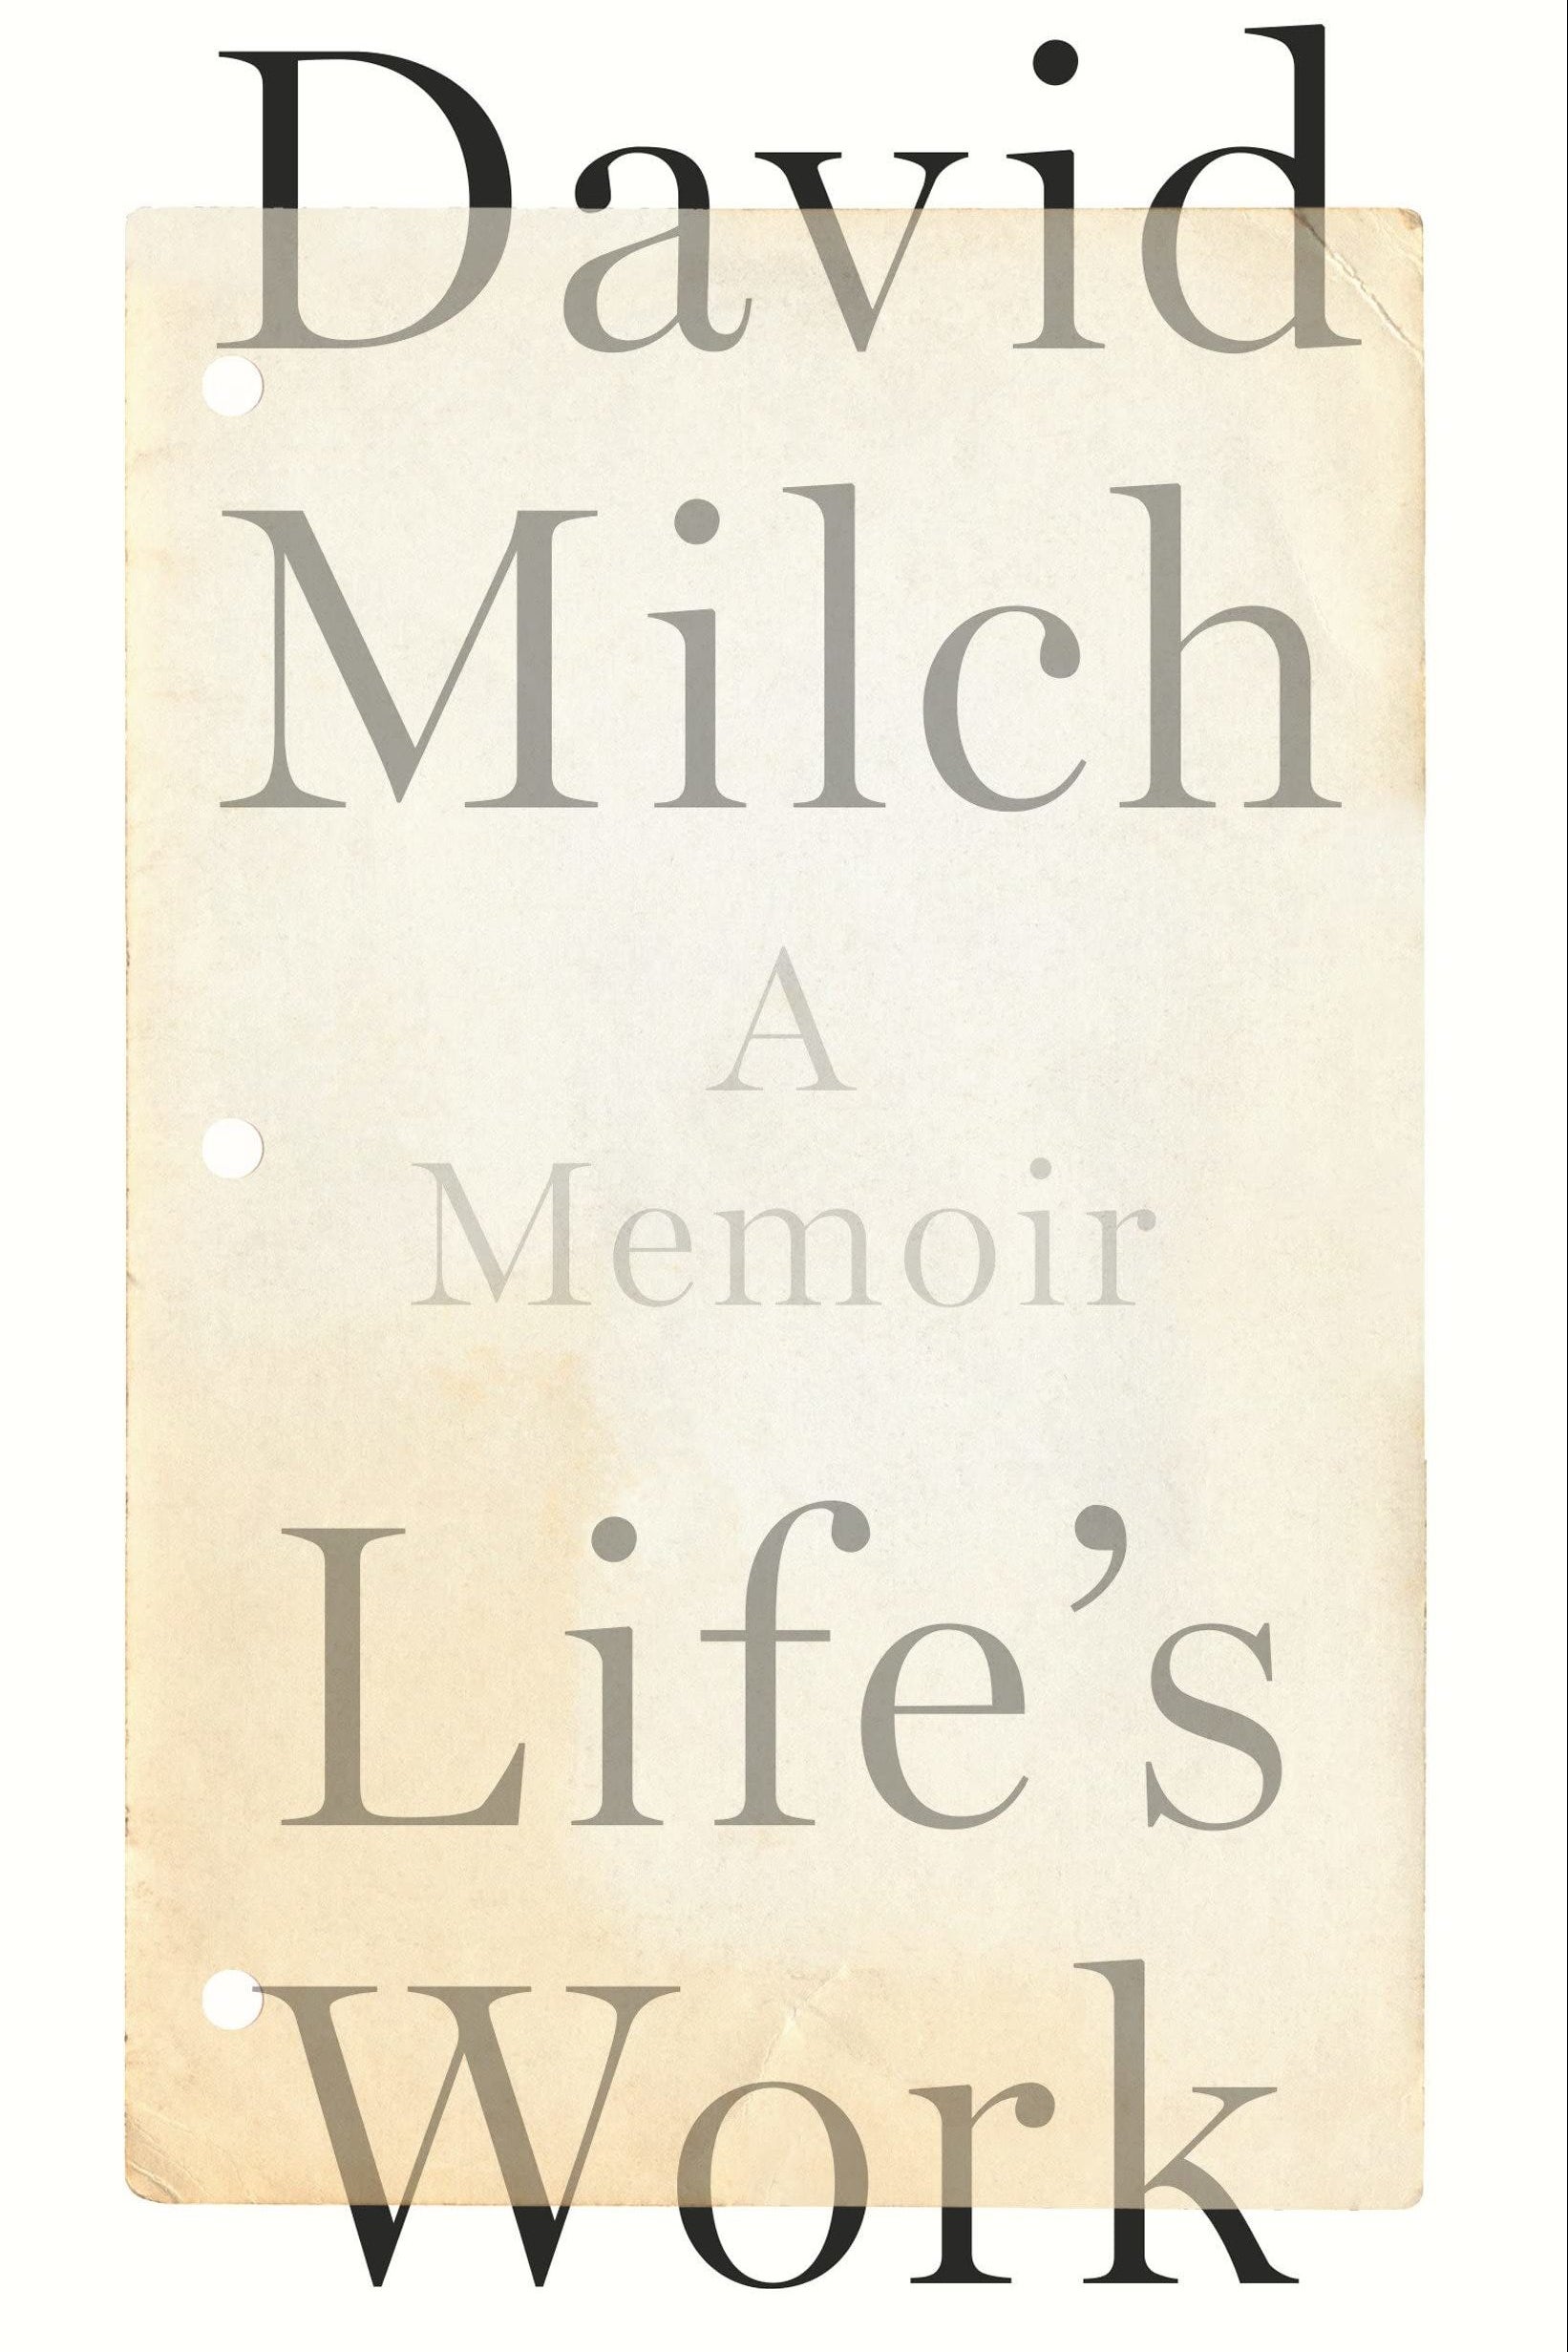 The cover of Life's Work (text on a white background).